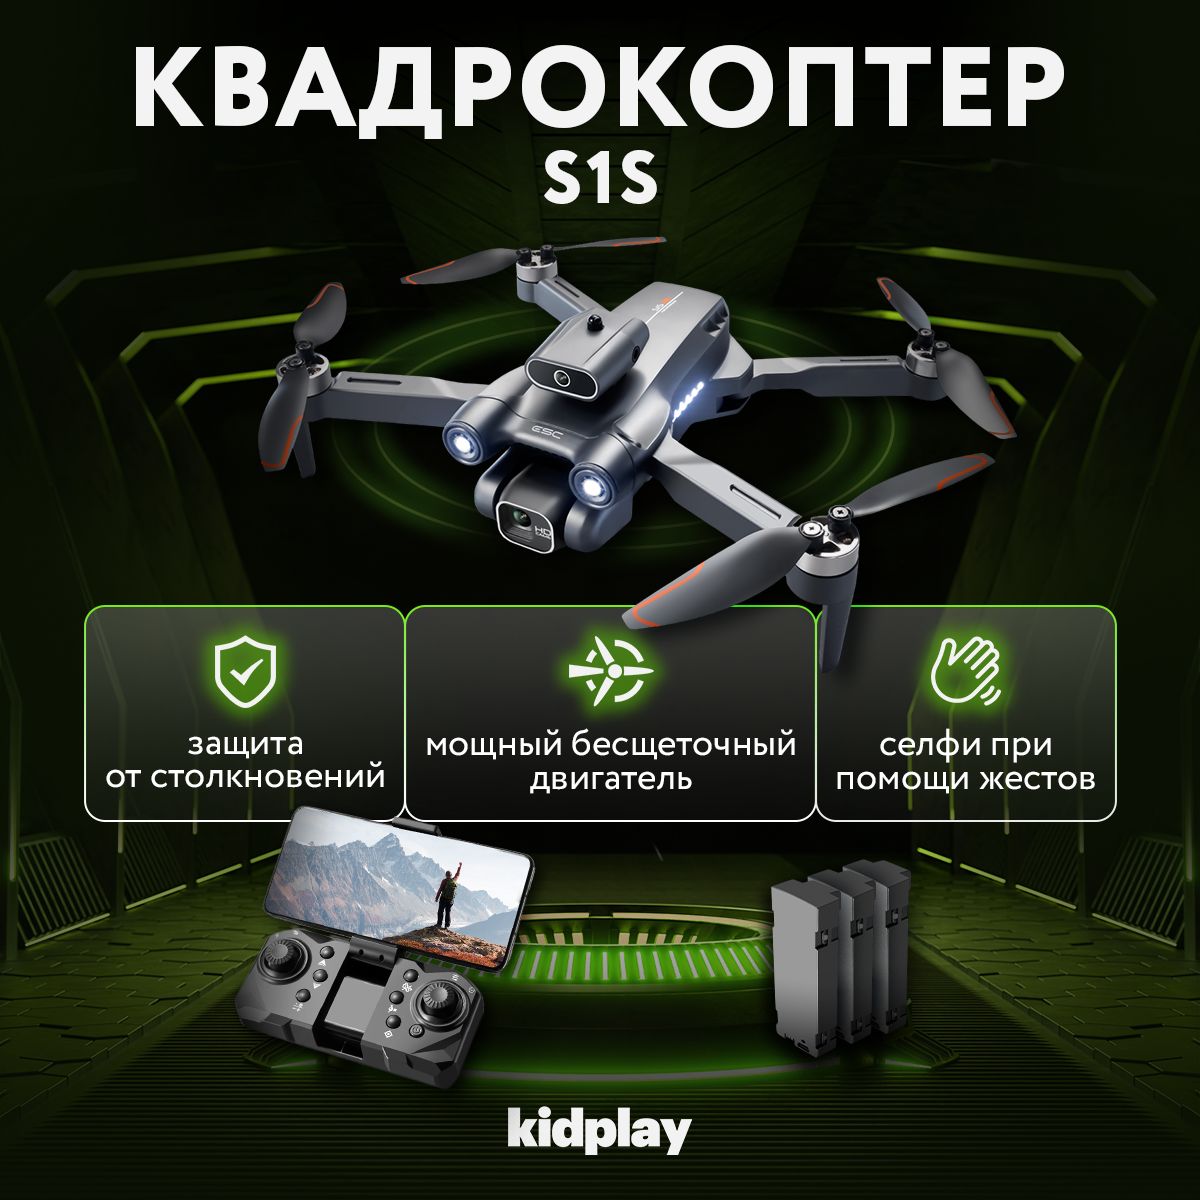 купить дрон - Are You Prepared For A Good Thing?